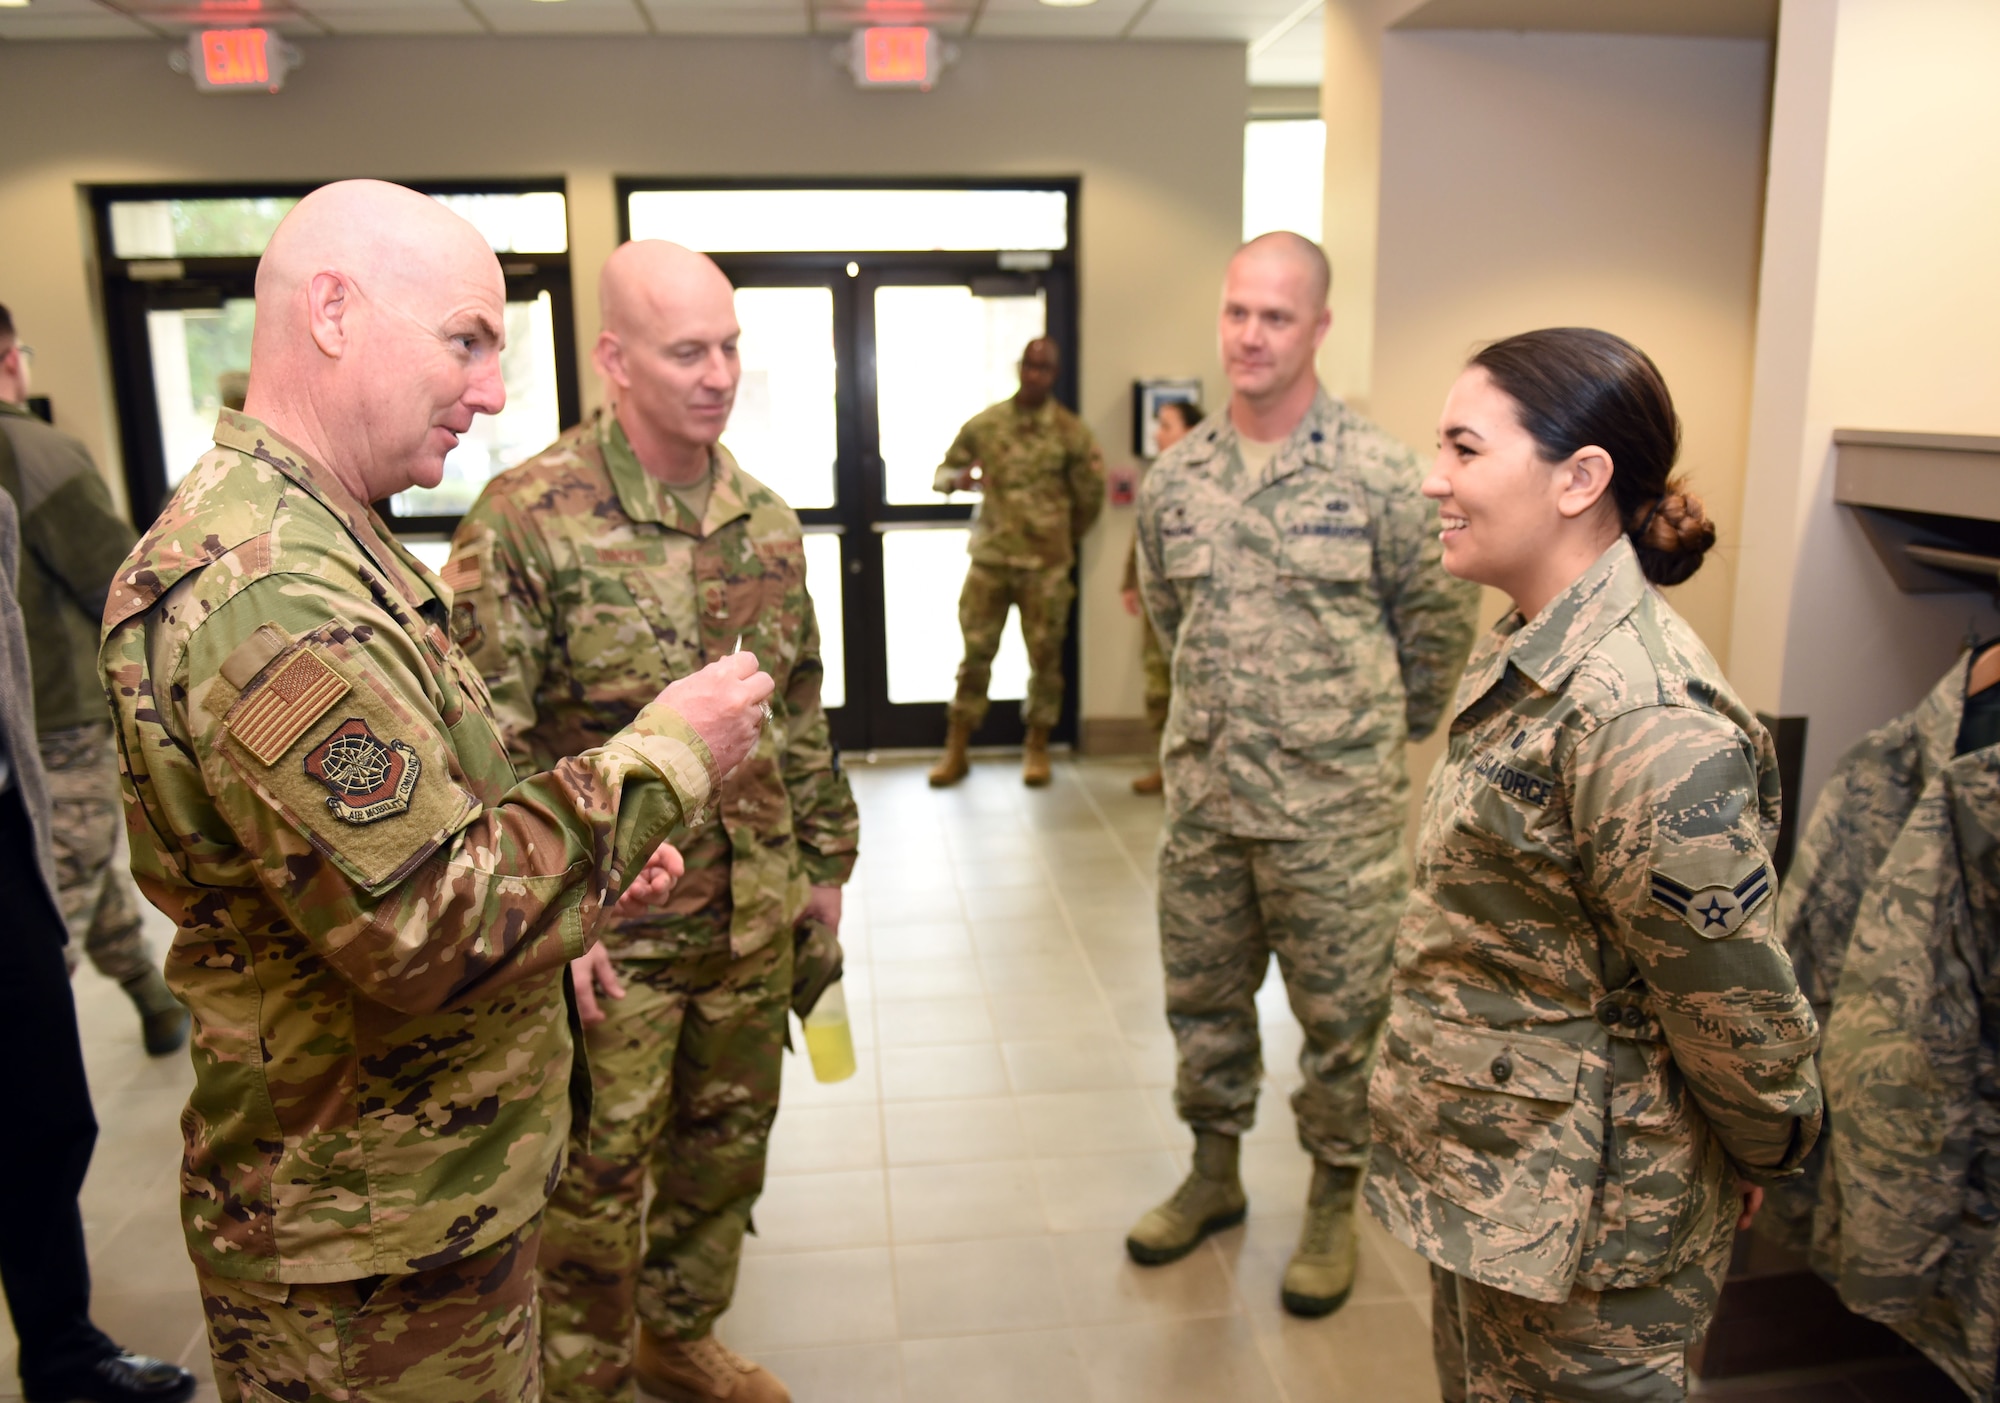 U.S. Air Force Maj. Gen. Sam Barrett, 18th Air Force commander, presents a coin to star performer U.S. Air Force Airman 1st Class Delaina McLeran, 60th Force Support Squadron food service specialist, during a visit to Travis Air Force Base, California, March 6, 2019, at the base's dining facility. Barrett, along with his wife, Kelly and U.S. Air Force Chief Master Sgt. Chris Simpson, 18th Air Force command chief, toured the base March 4 to 8 as part of a scheduled visit. (U.S. Air Force photo by Airman 1st Class Christian Conrad)